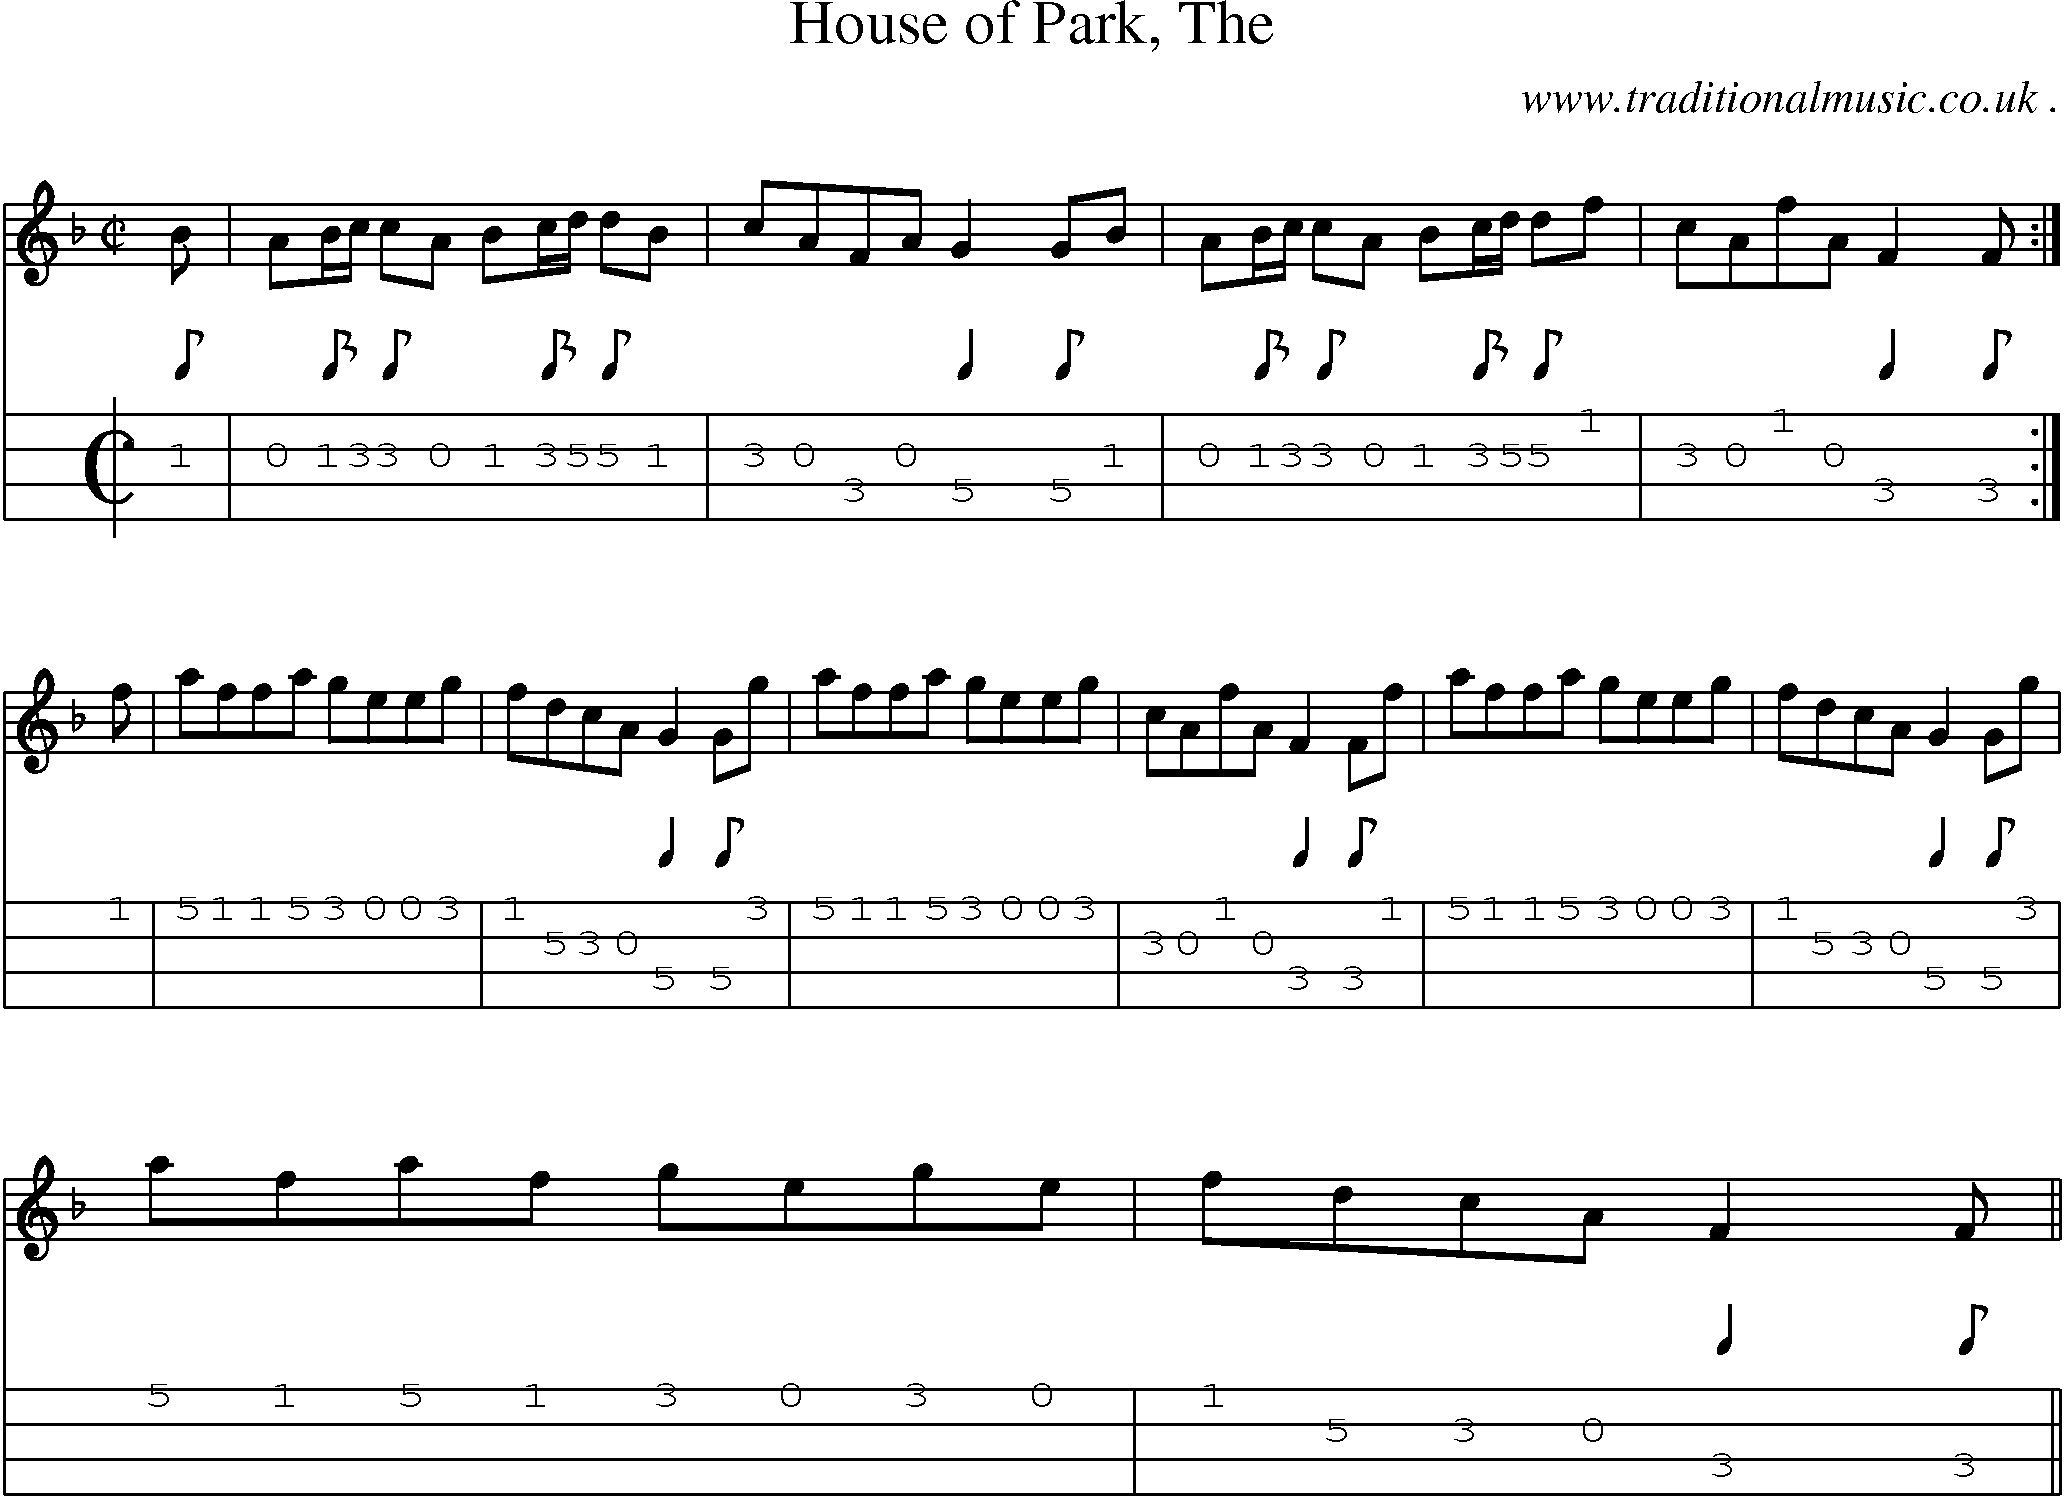 Sheet-music  score, Chords and Mandolin Tabs for House Of Park The